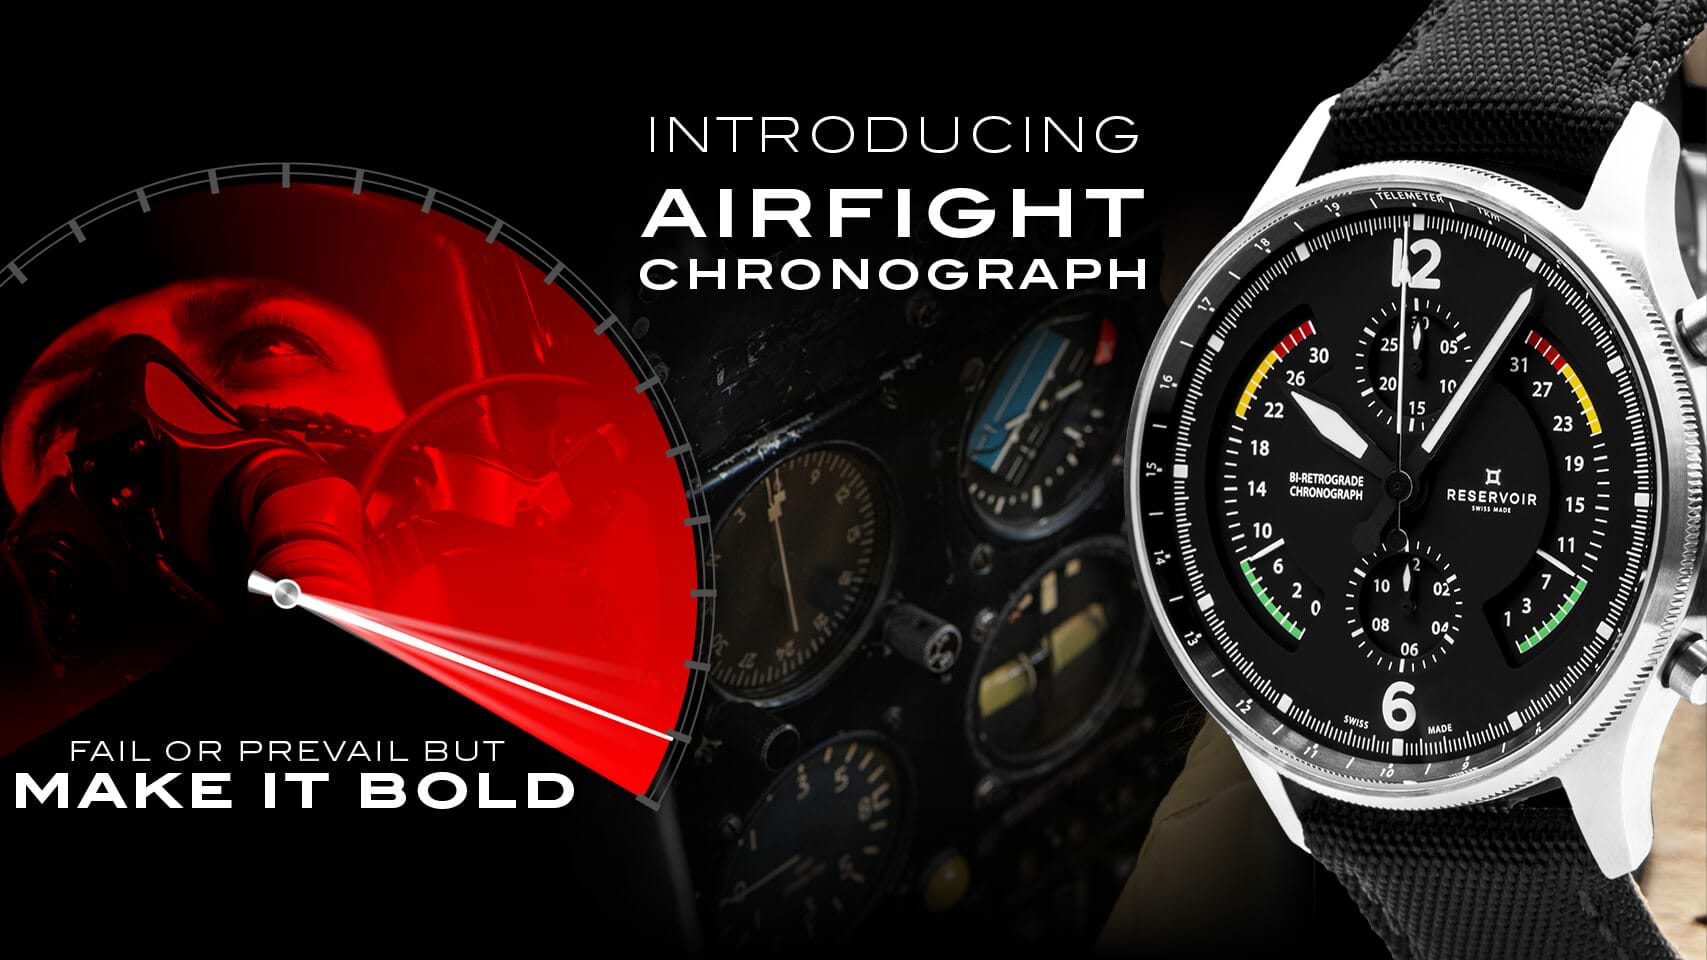 Airfight Jet Chronograph Watch with Black, Light Salmon Pink, and Light Grey.